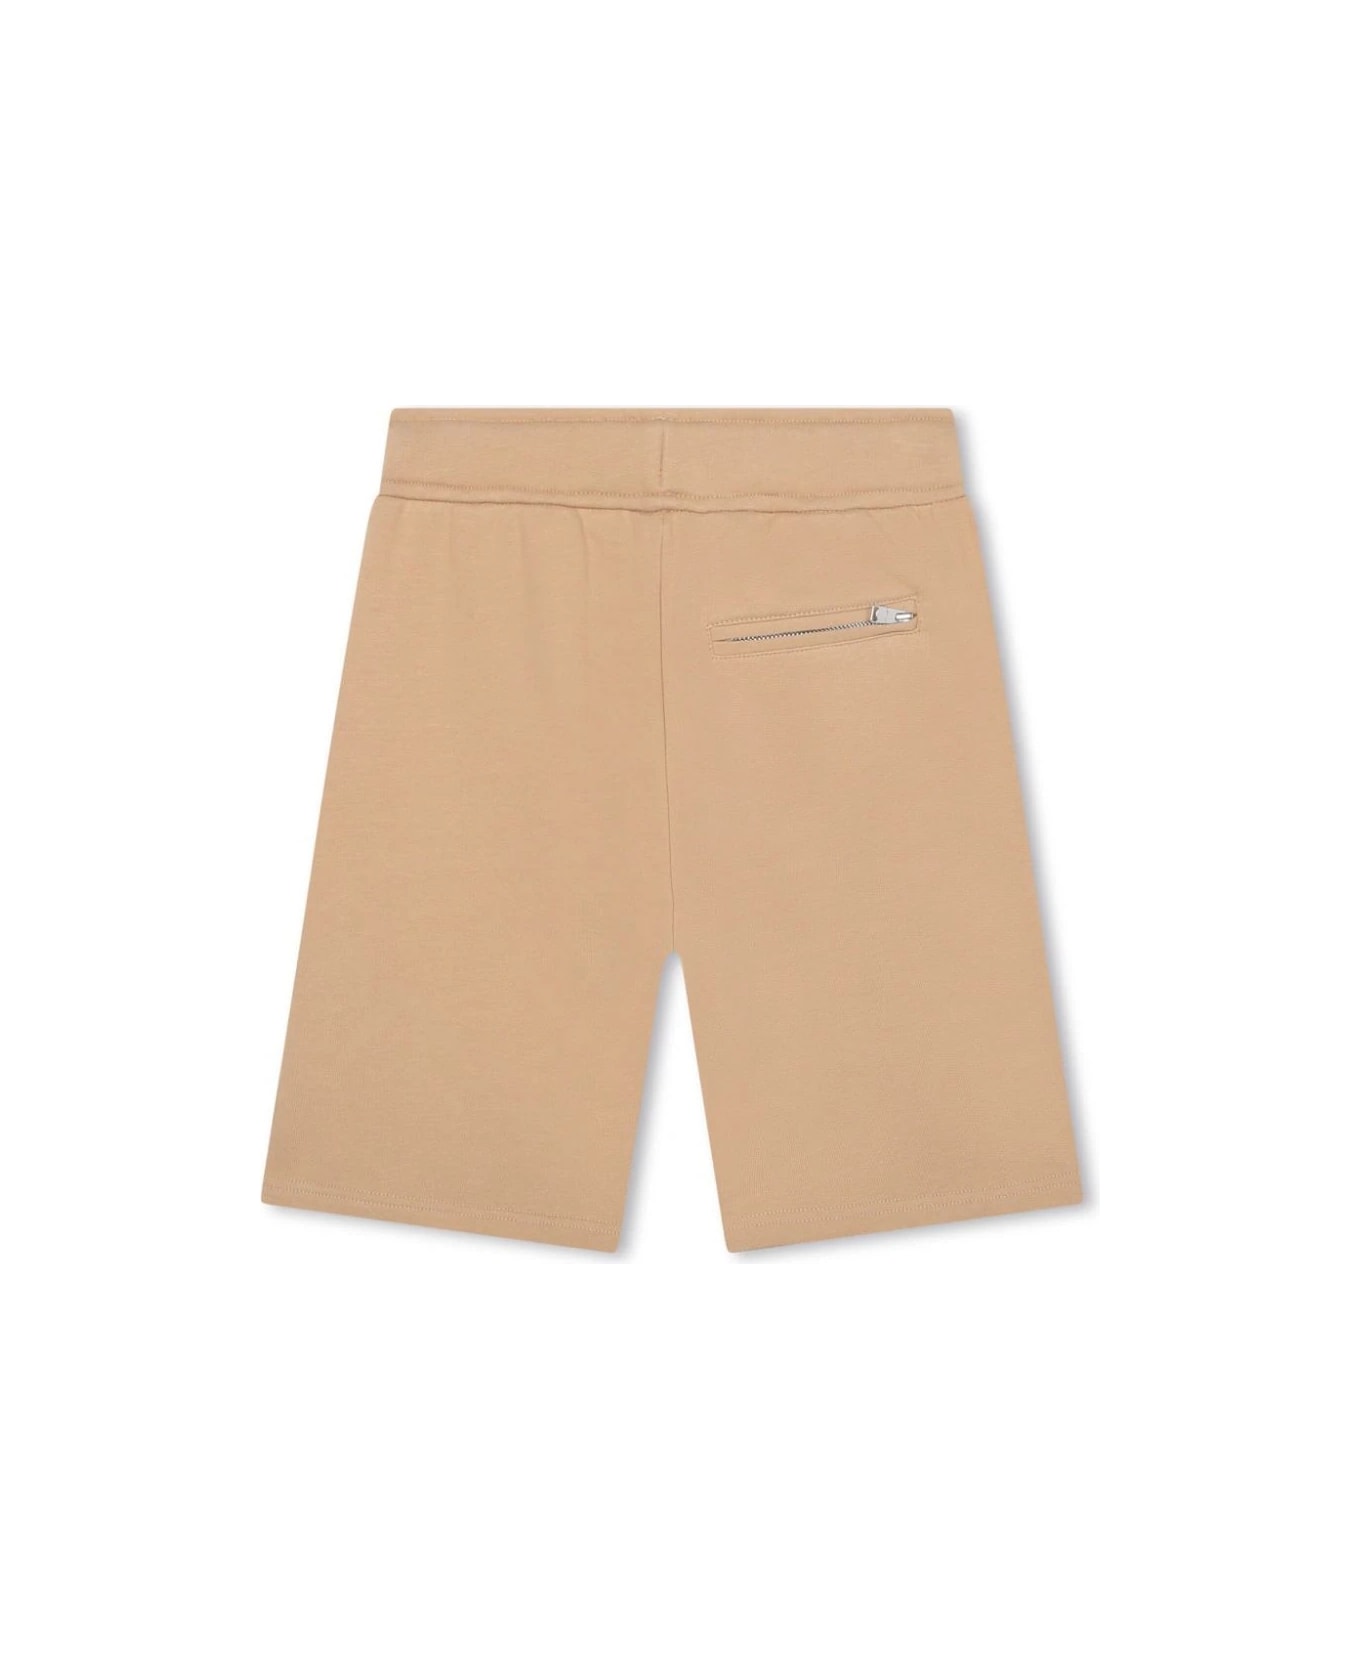 Lanvin Beige Shorts With Logo And "curb" Motif - Brown ボトムス